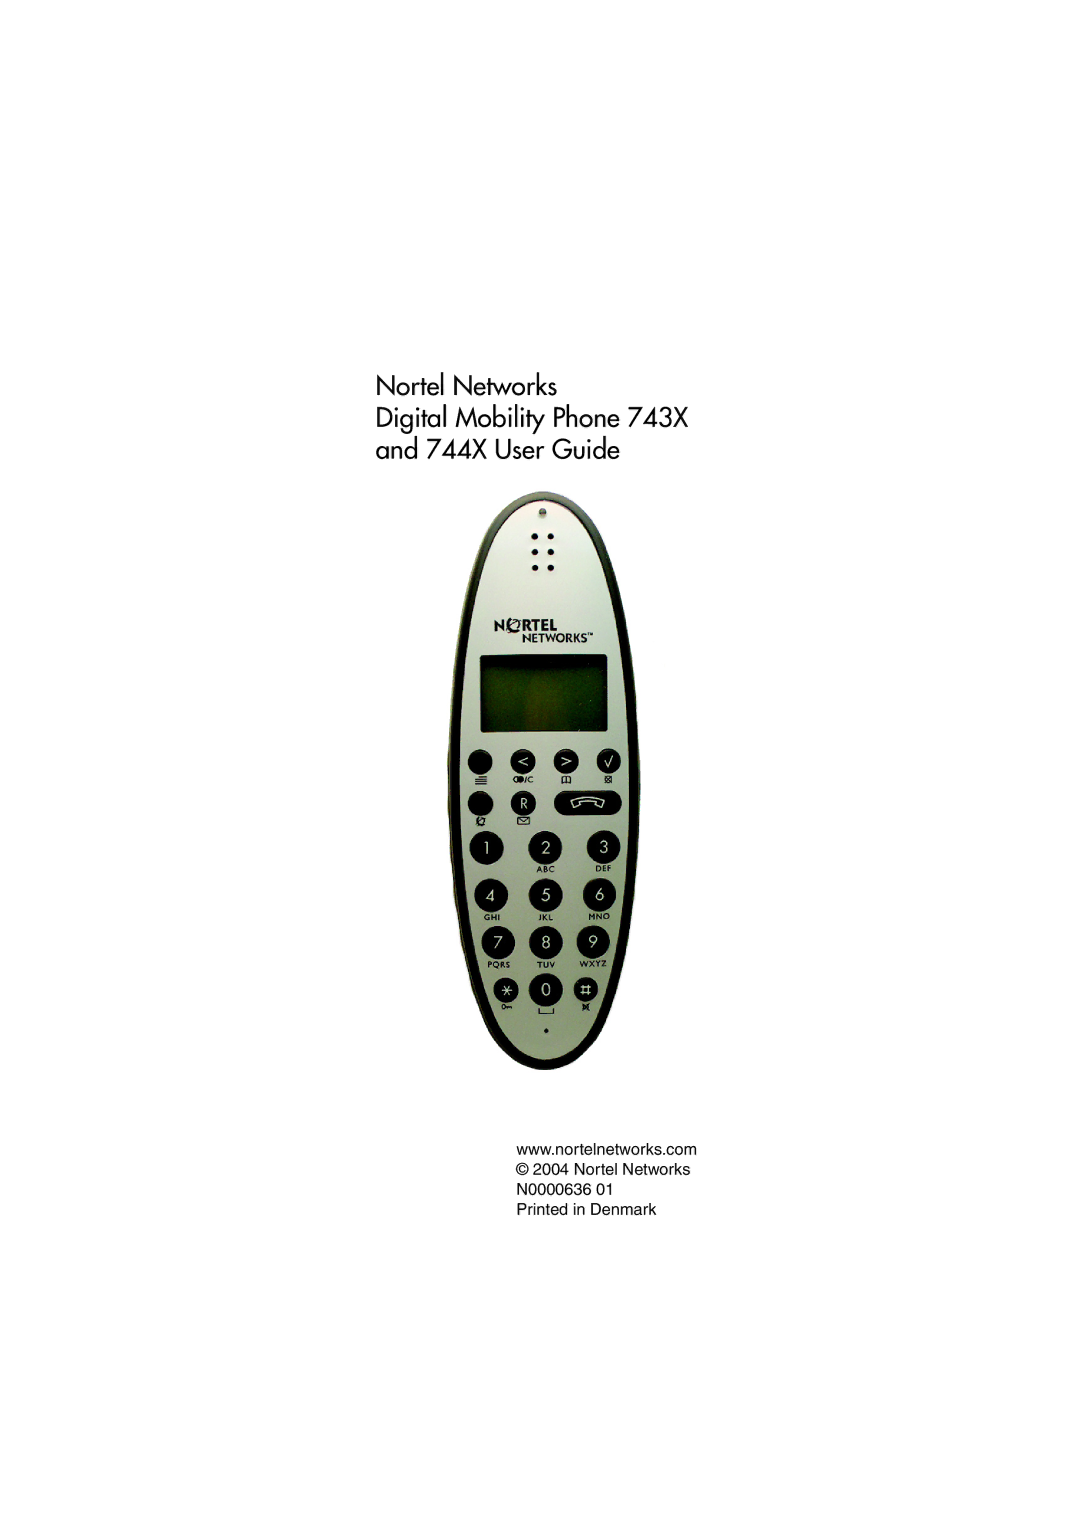 Nortel Networks 743X manual Nortel Networks Digital Mobility Phone 744X User Guide 